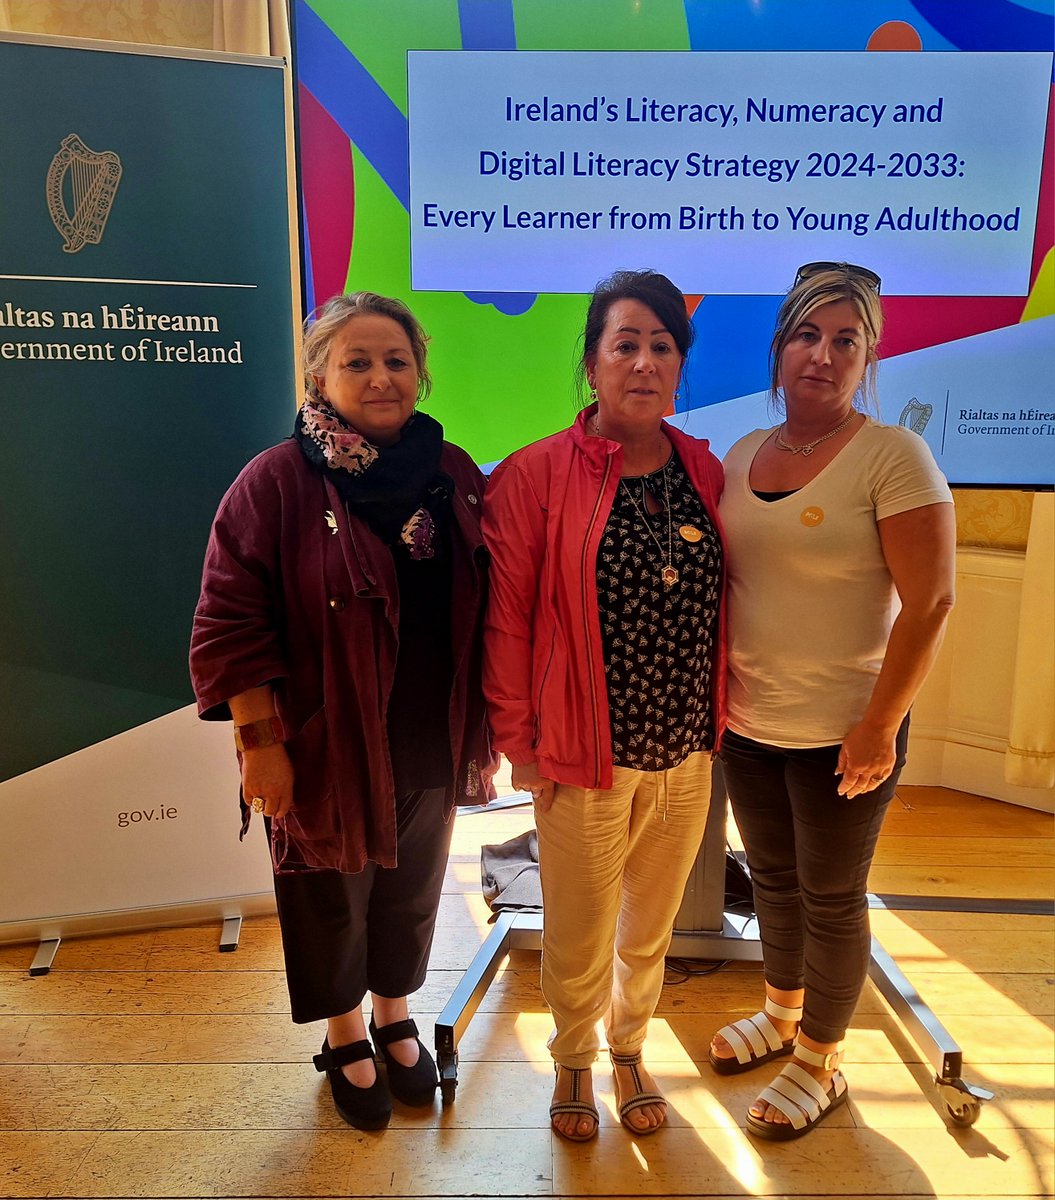 At today's launch of Ireland’s Literacy, Numeracy and Digital Literacy Strategy 2024-2033, launched by Ministers @NormaFoleyTD1 & @rodericogorman. One of the strategy aims is to overcome the barriers facing #Traveller and #Roma children. Read more here: bit.ly/4bAWhRJ